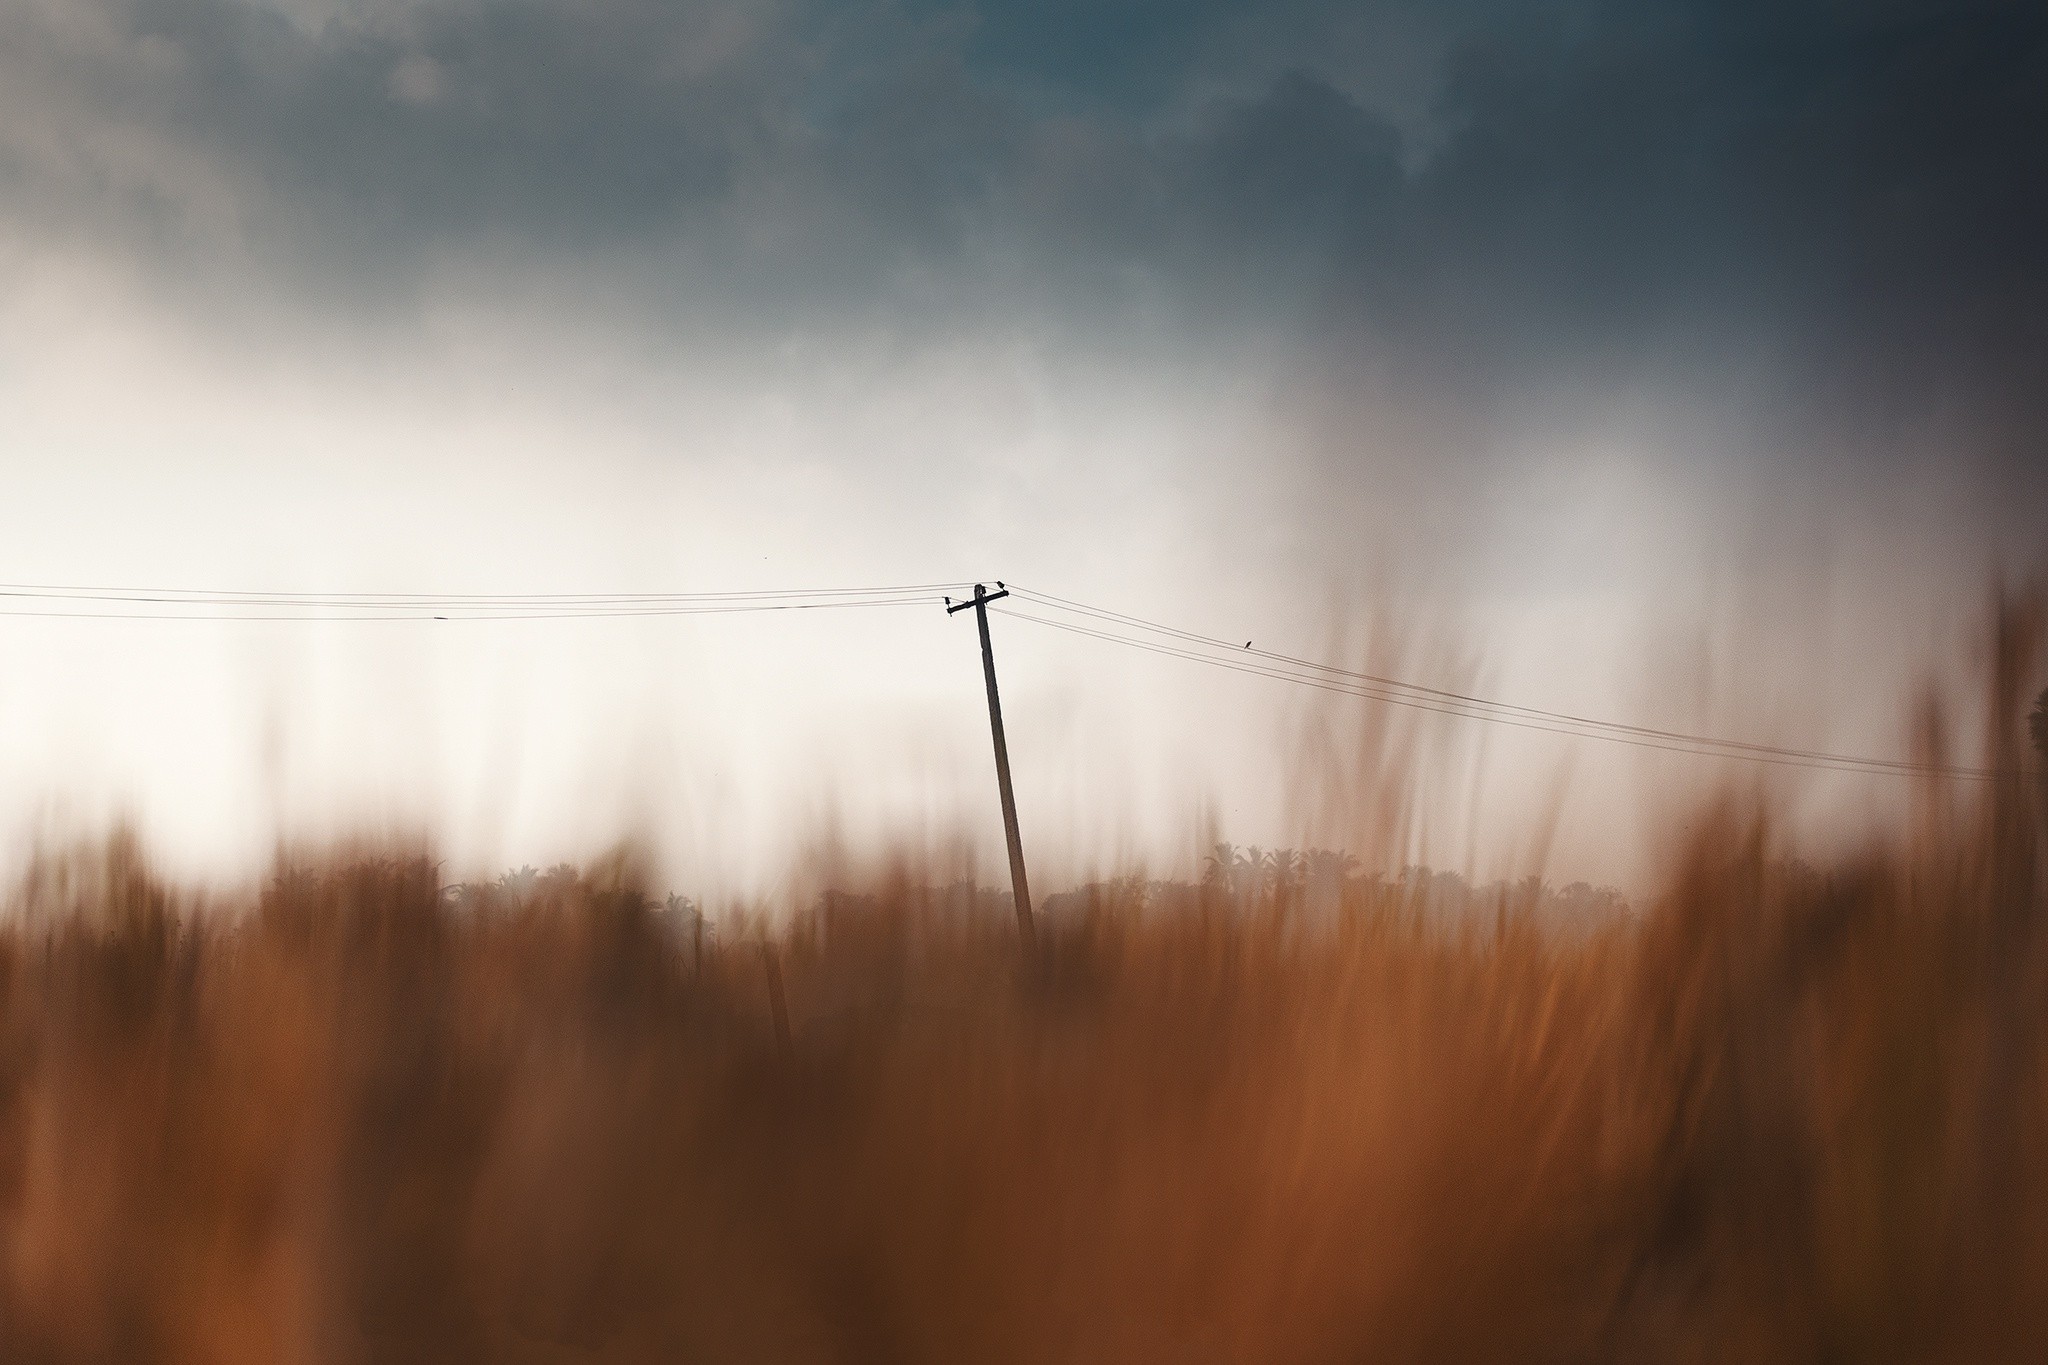 General 2048x1365 outdoors sky power lines landscape